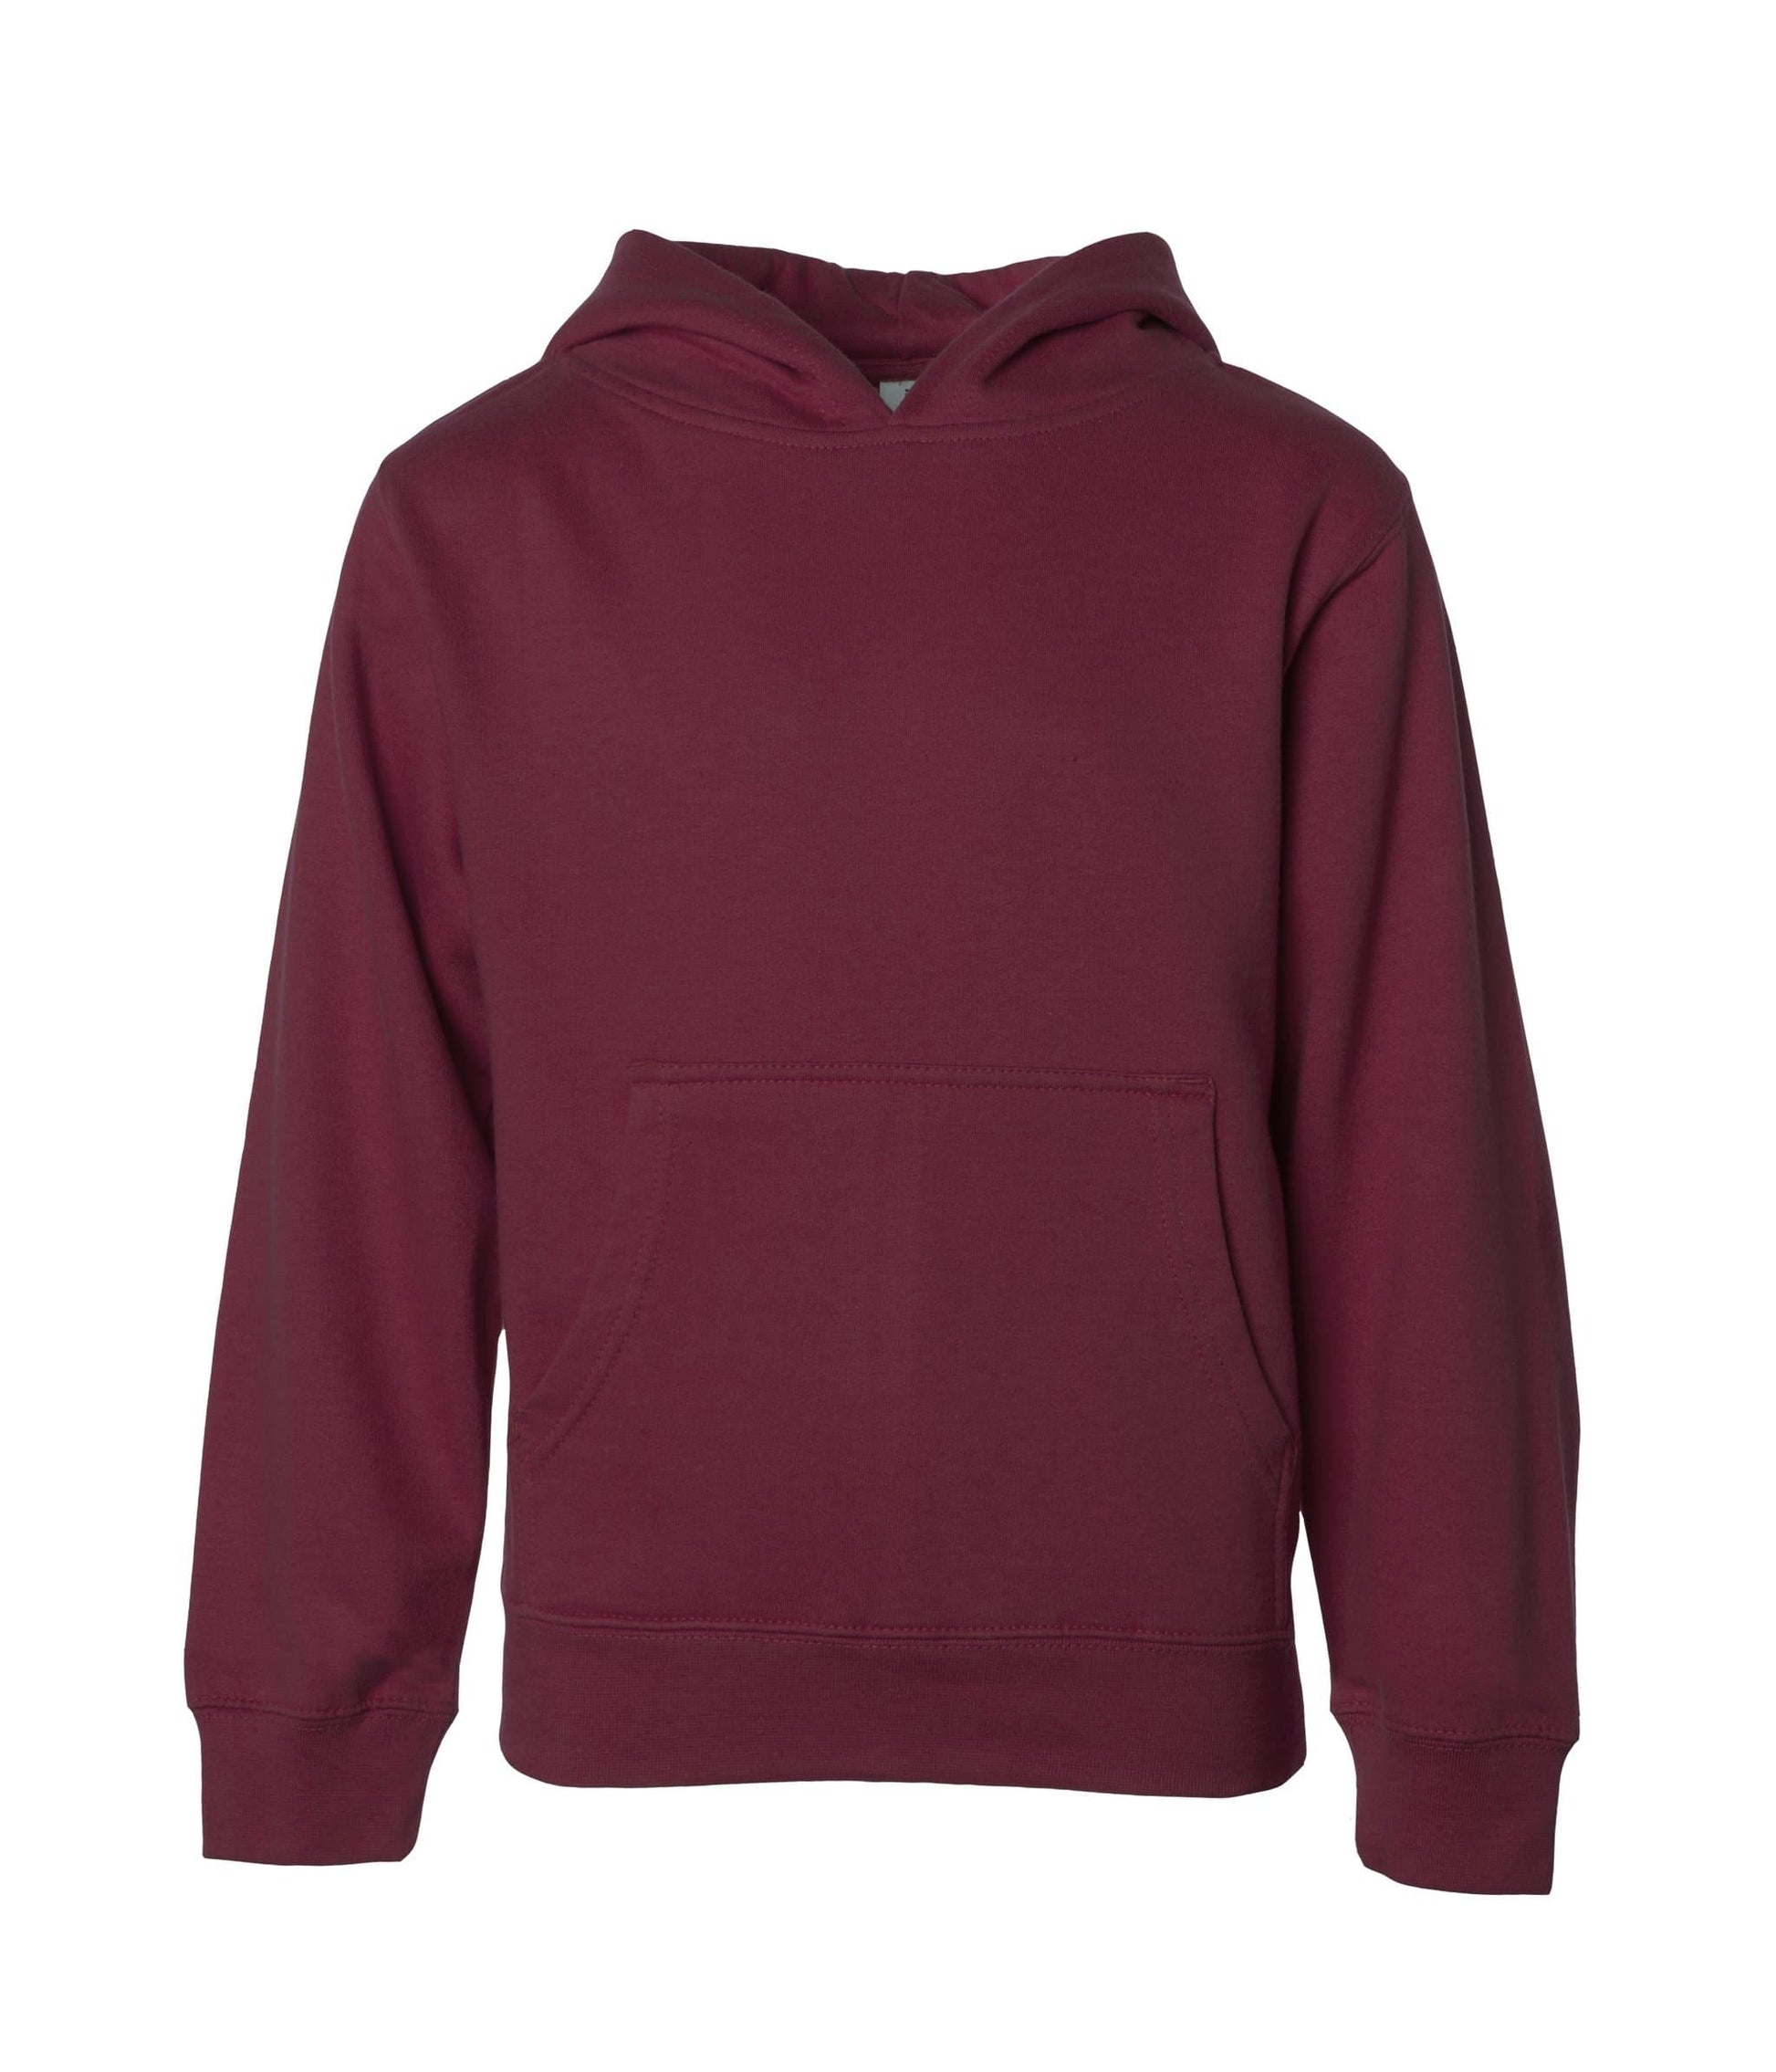 SS4001Y Youth Midweight Pullover Hooded Sweatshirt - Maroon